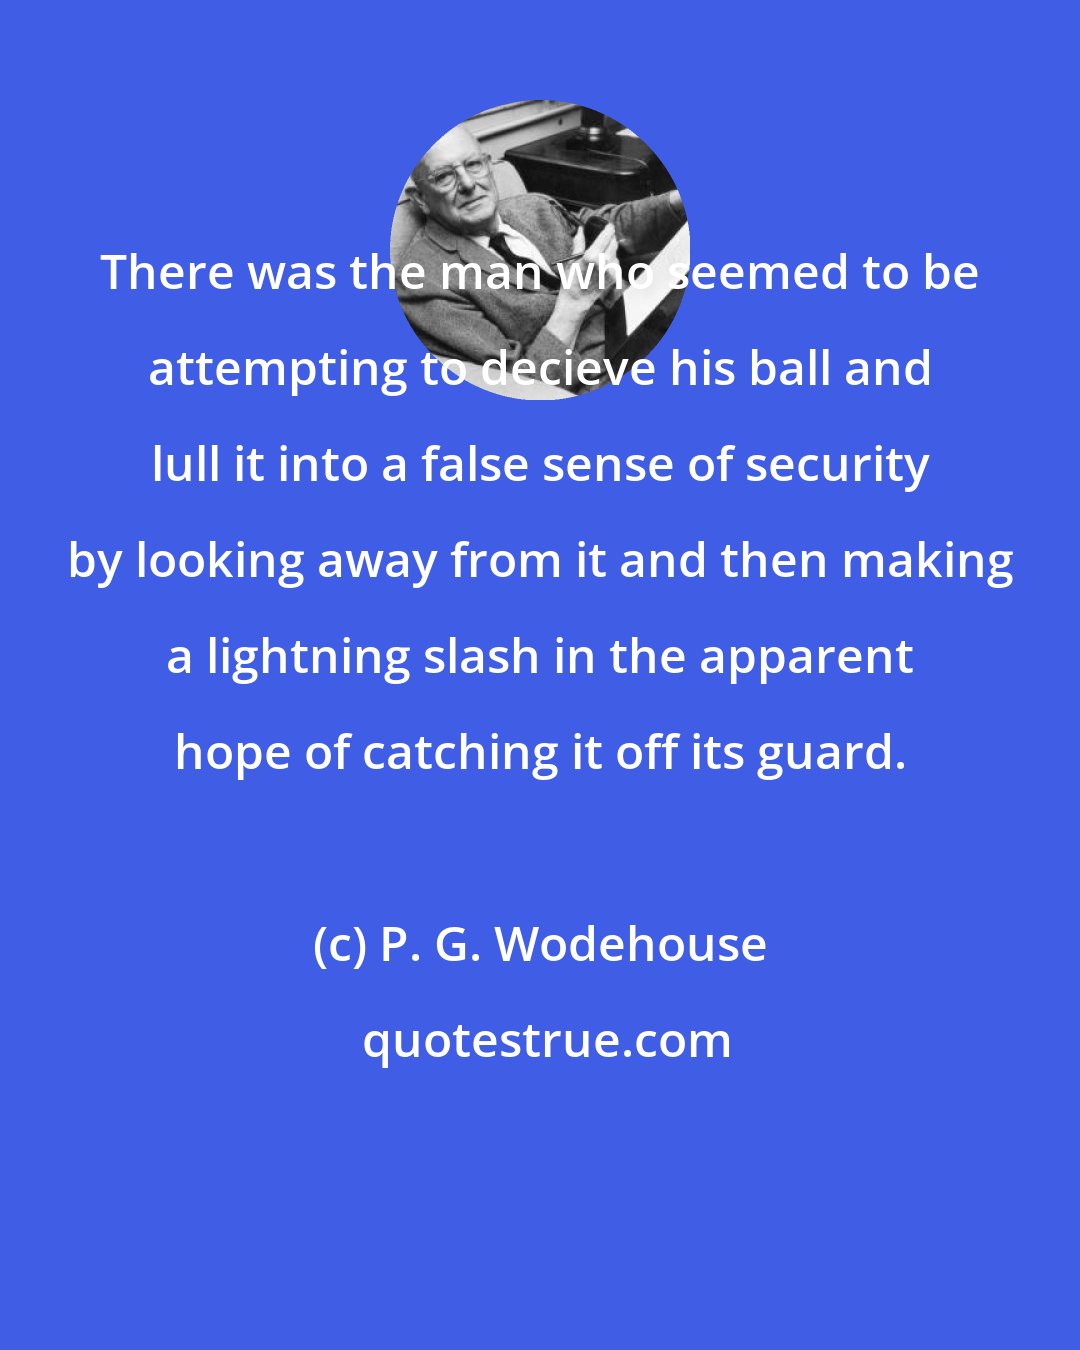 P. G. Wodehouse: There was the man who seemed to be attempting to decieve his ball and lull it into a false sense of security by looking away from it and then making a lightning slash in the apparent hope of catching it off its guard.